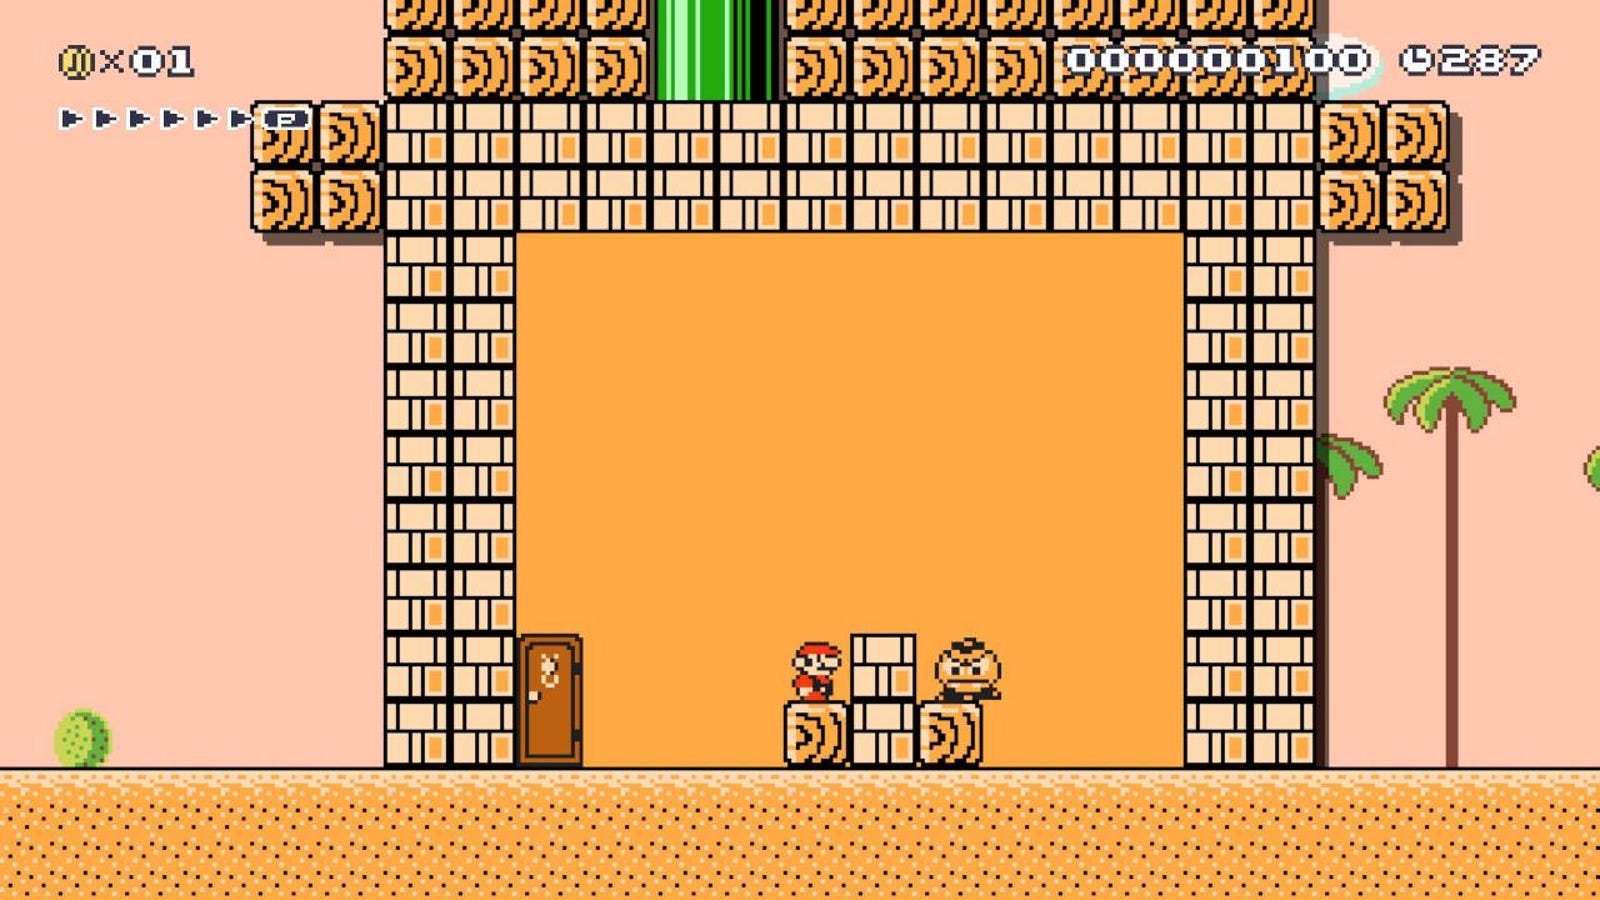 Mario Maker Level Locks You In A Room With A Goomba And Your Darkest Thoughts - Kotaku thumbnail